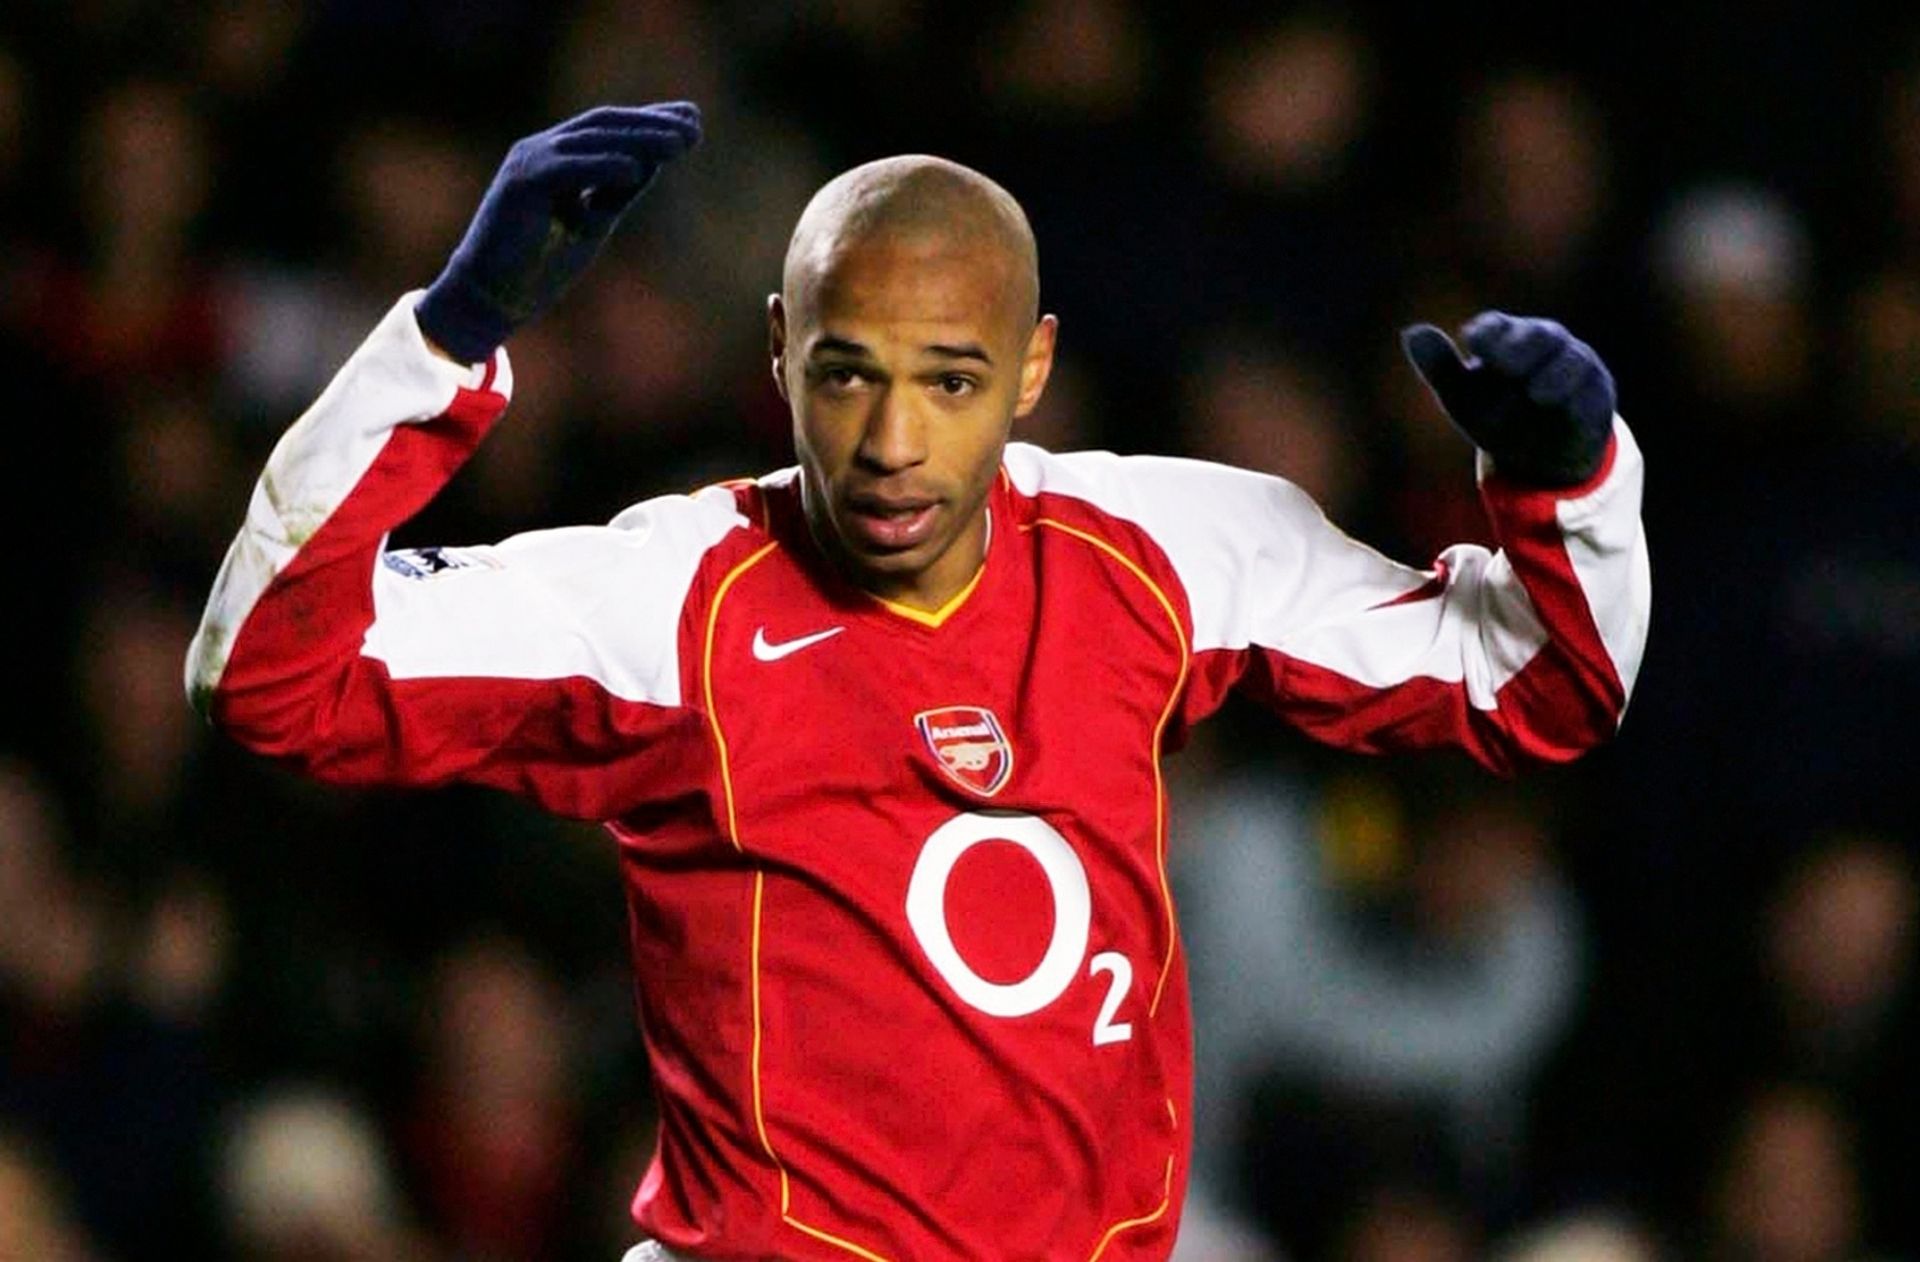 Thierry Henry's update on Daniel Ek's offer to buy Arsenal